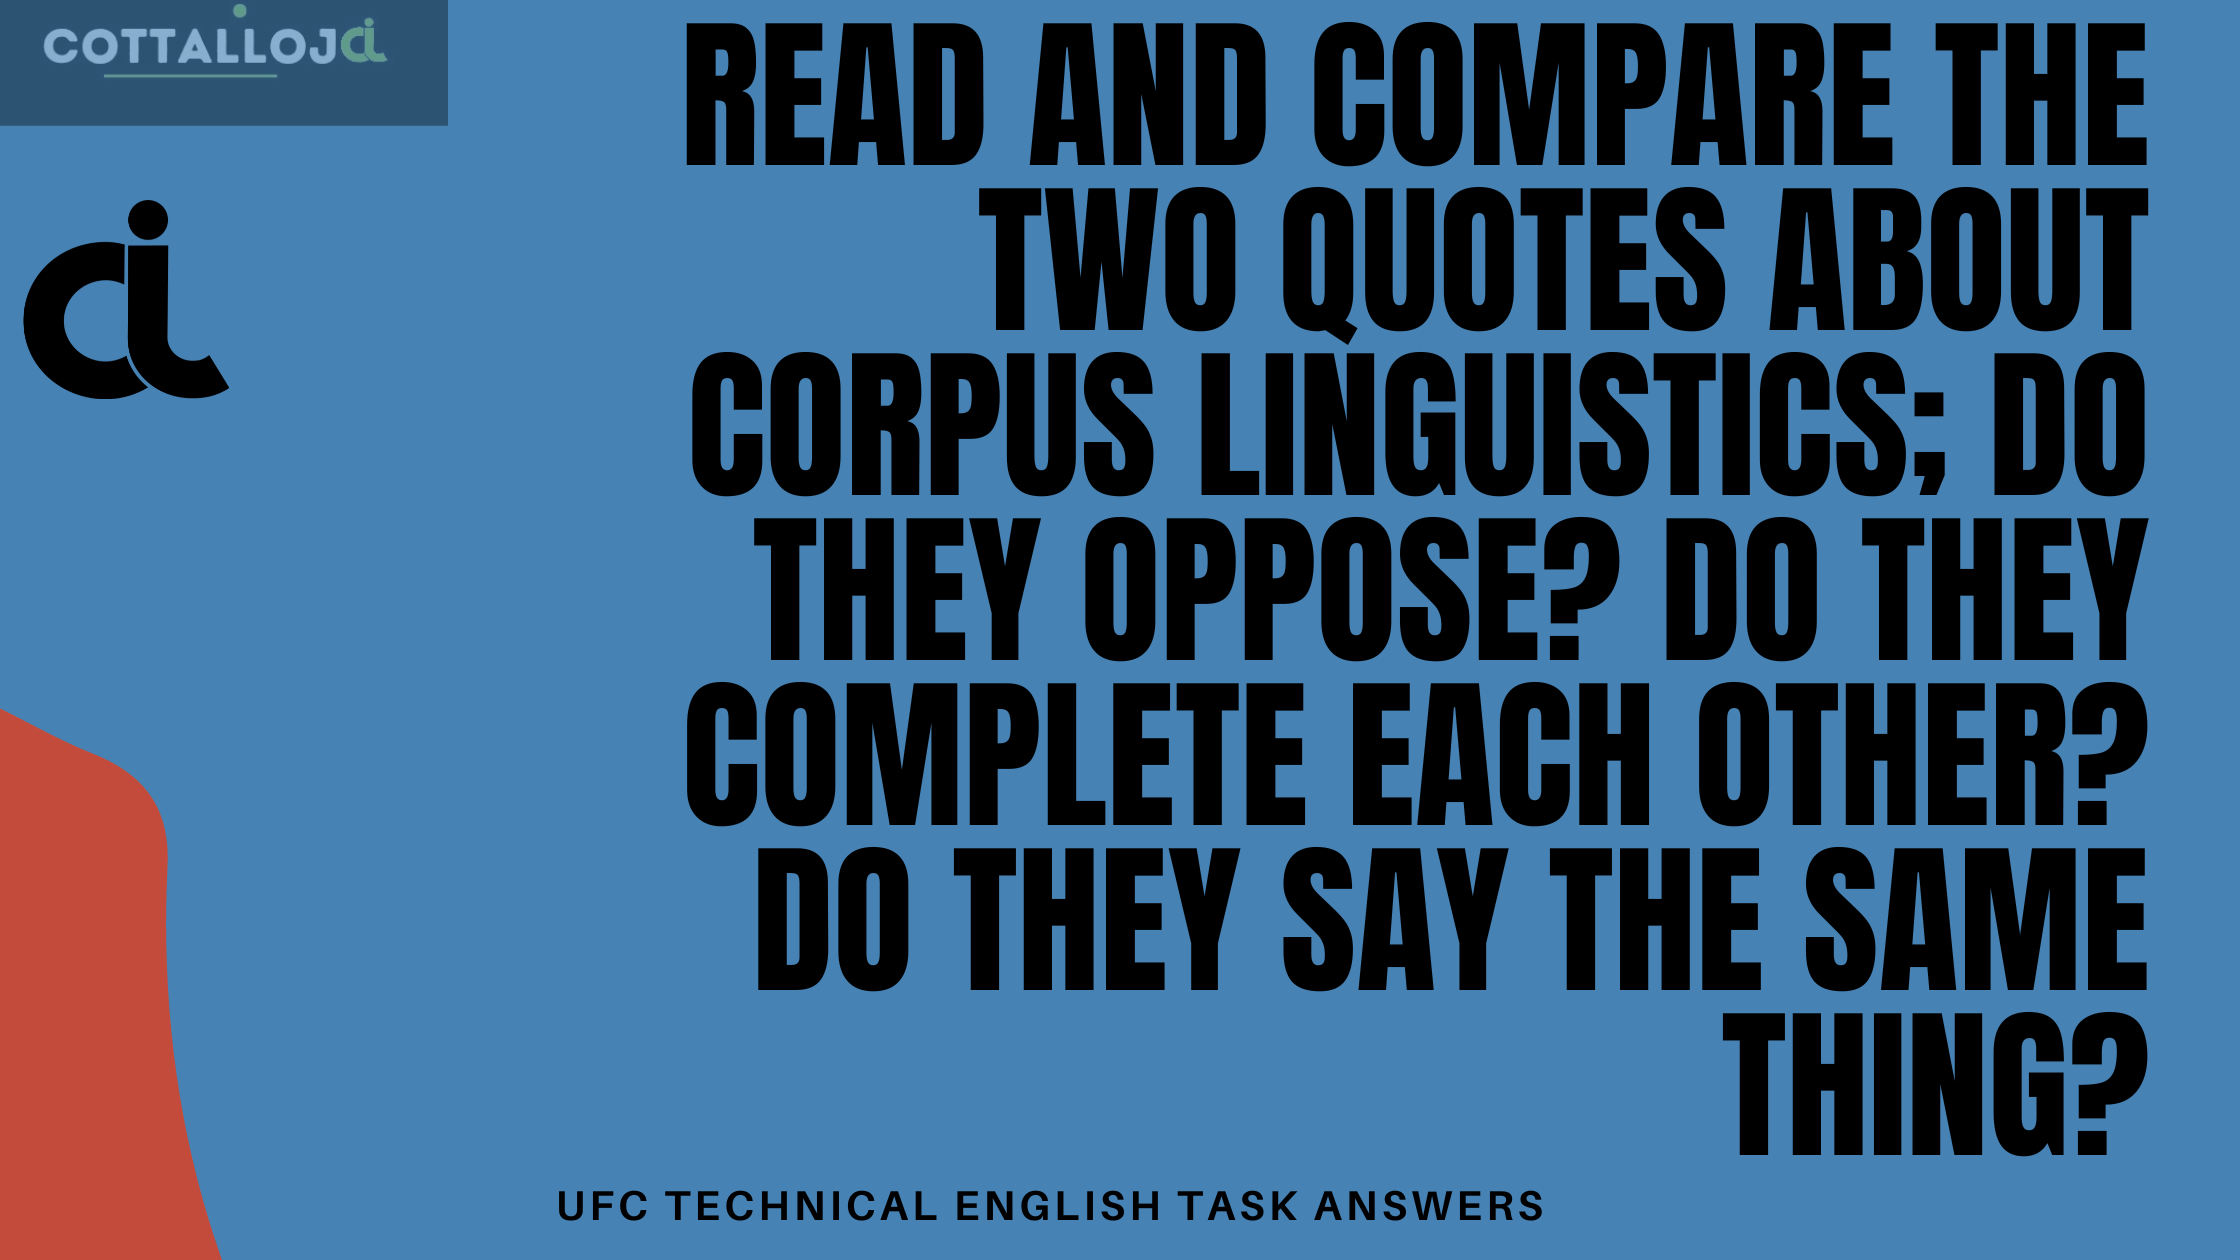 READ and COMPARE the two quotes about Corpus Linguistics; Do they oppose? Do they complete each other? Do they say the same thing?